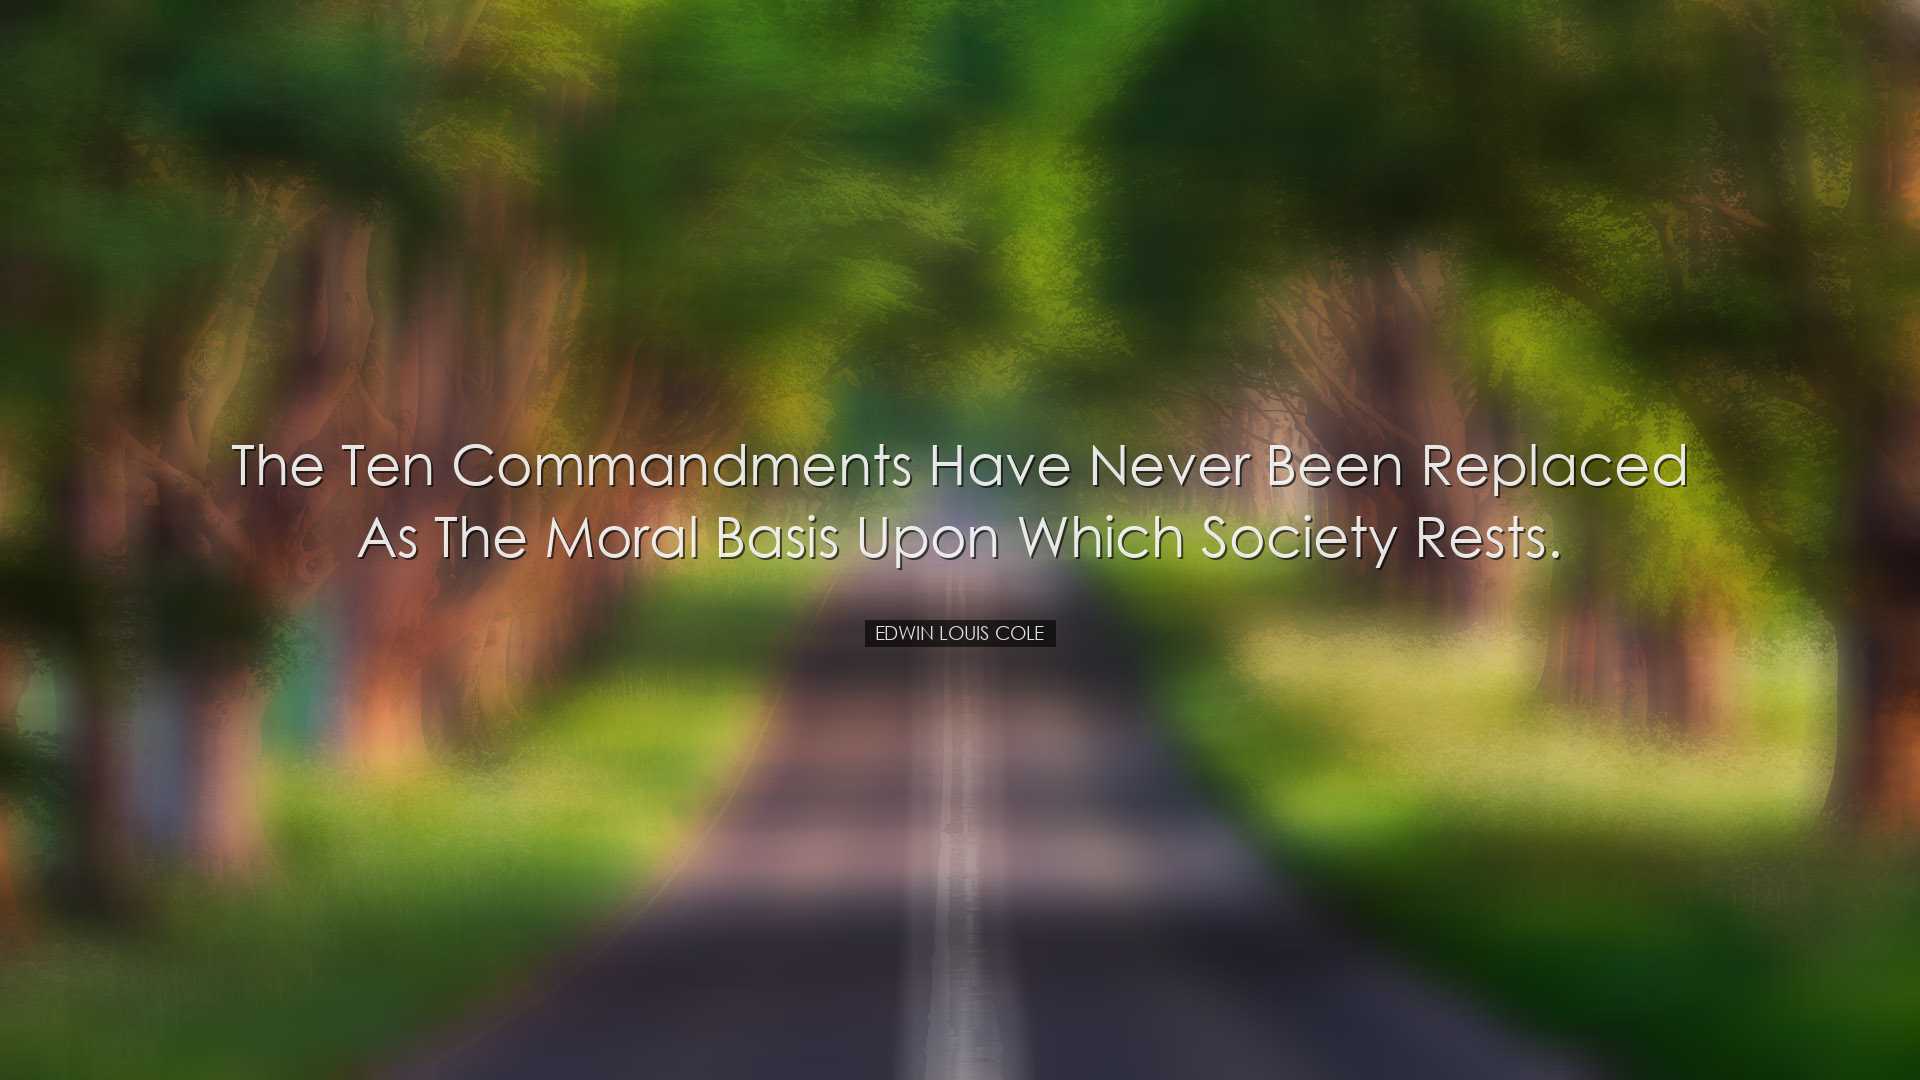 The Ten Commandments have never been replaced as the moral basis u